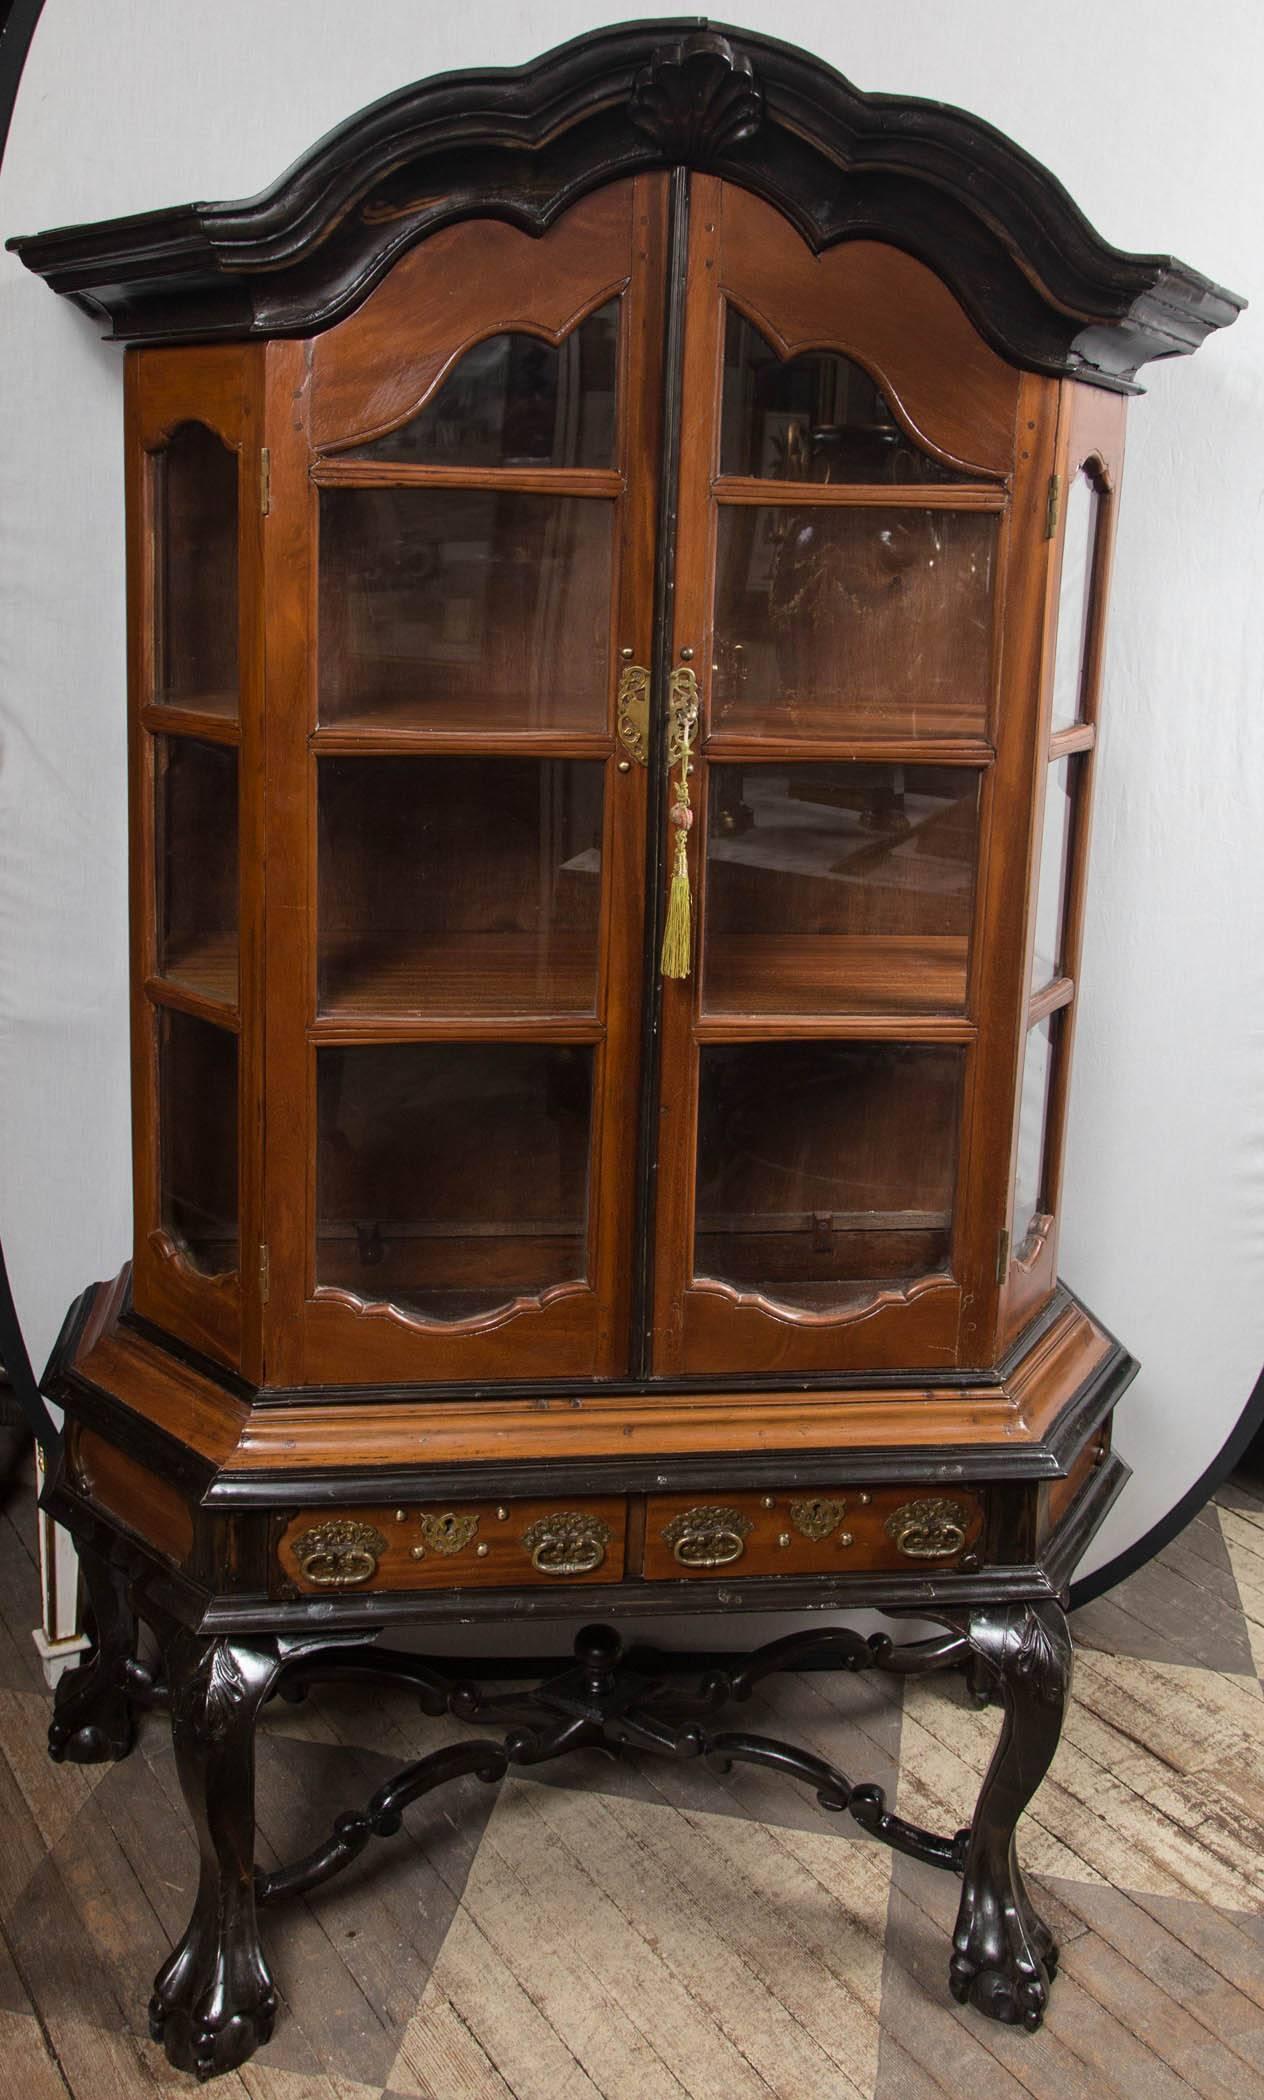 Double glazed doors with canted side glazed panes. Arched ebonized cornice, conforming door and side frames. Two shelves within. Two drawers below doors.
Ebonized base, ball and claw feet, cabriole legs joined by a stylized X-stretcher with